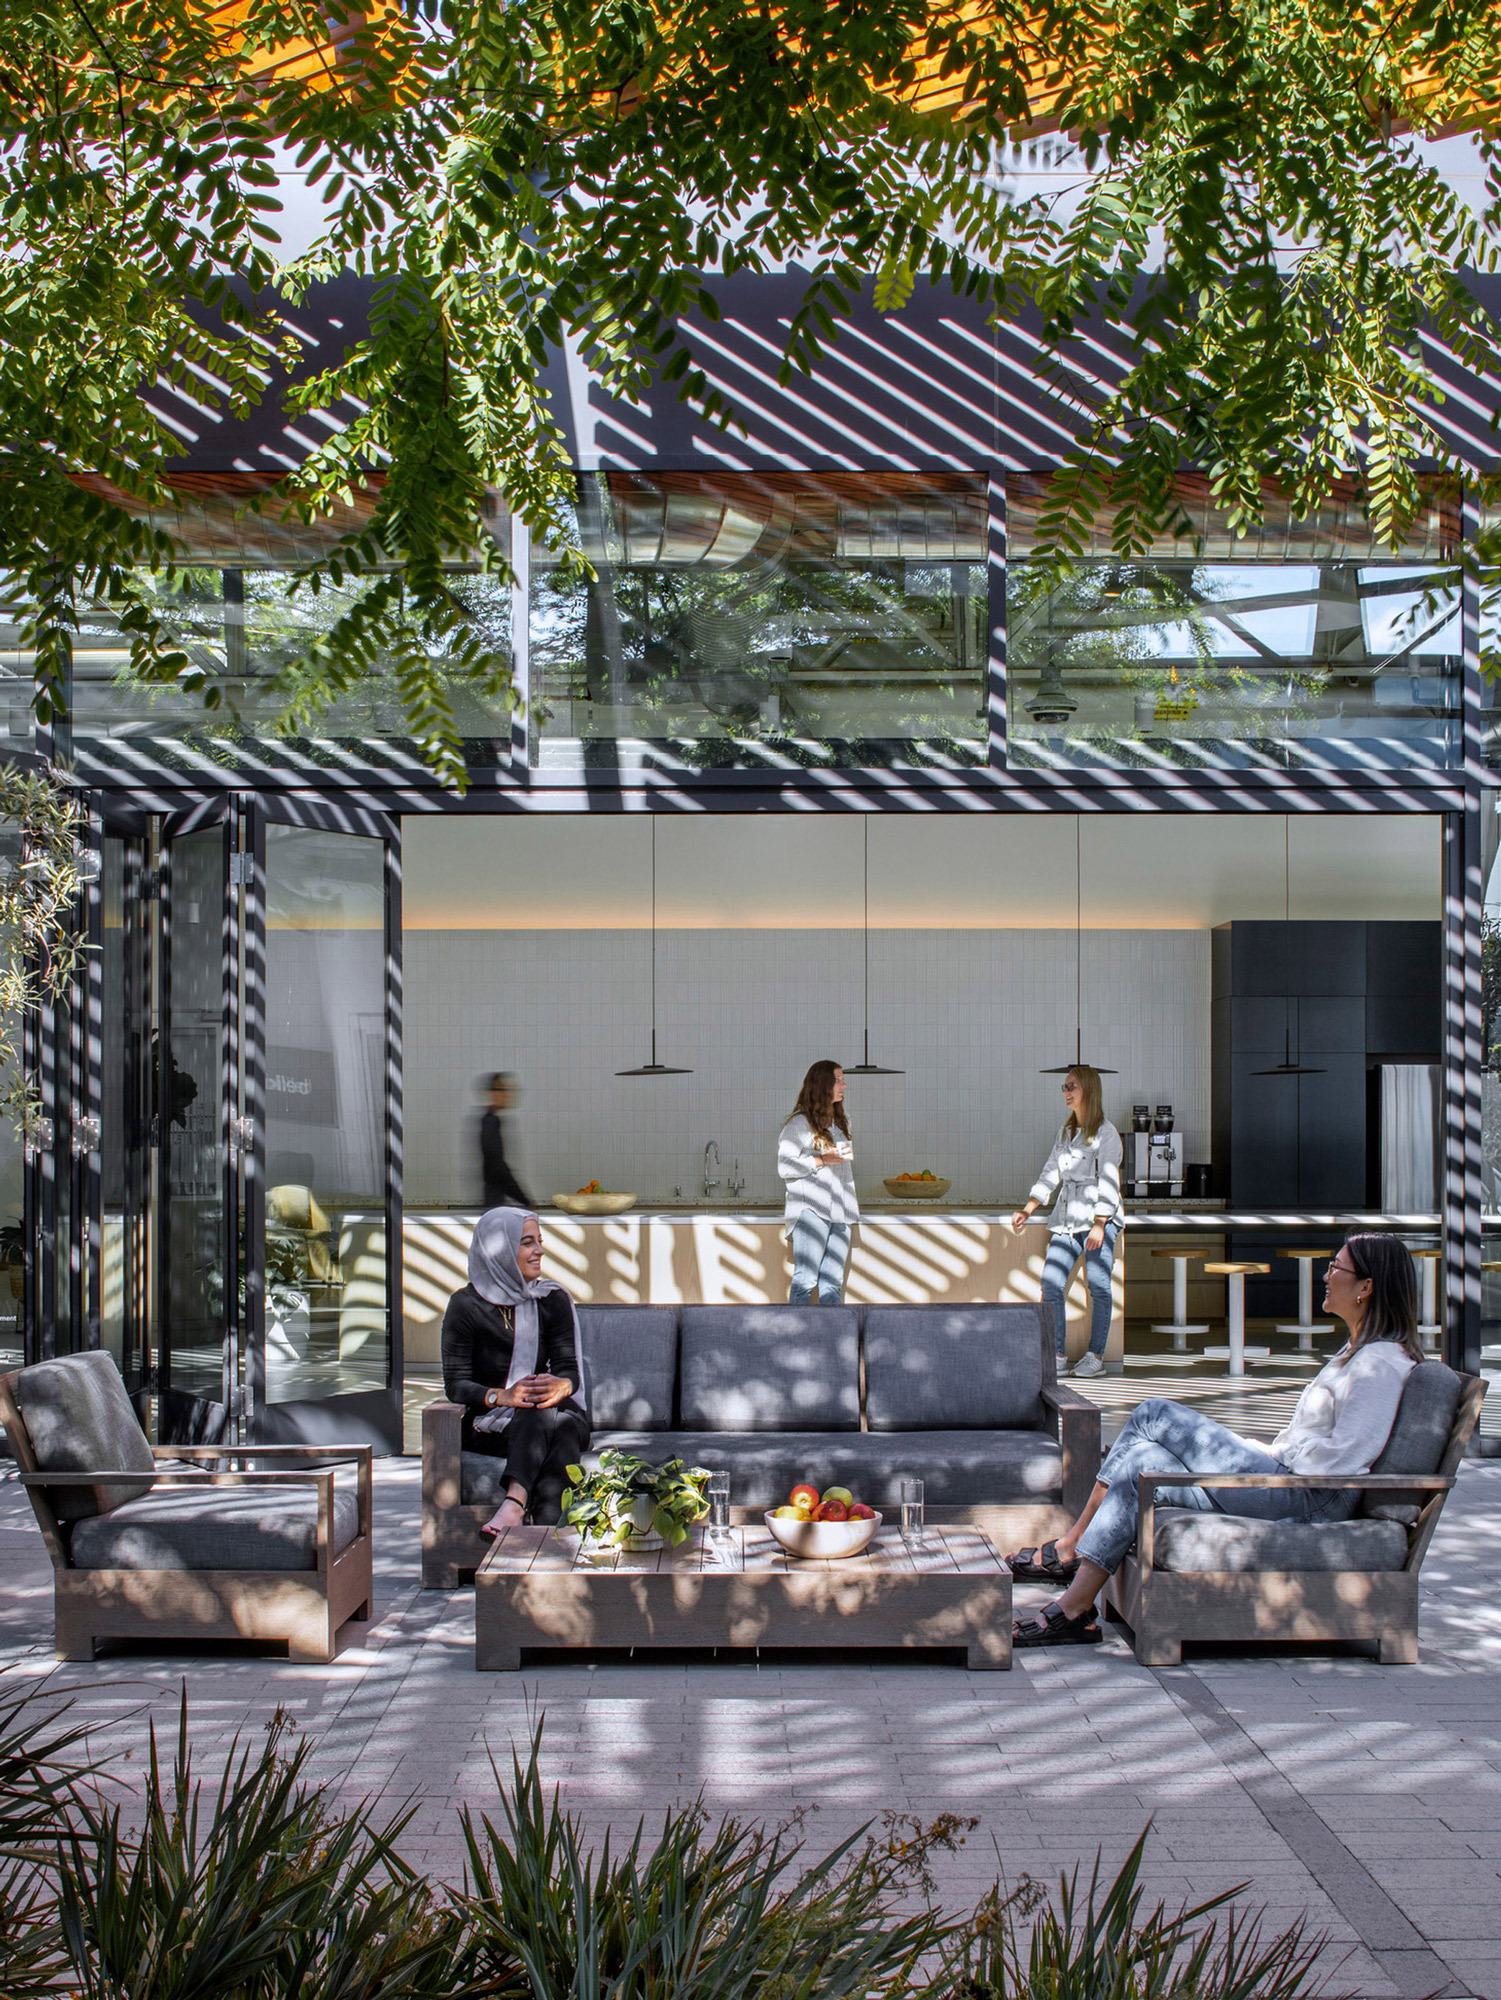 Modern outdoor lounge area with slatted wooden pergola casting shadows, featuring plush seating, glass walls, and a kitchenette, set amidst lush greenery for a seamless indoor-outdoor transition.